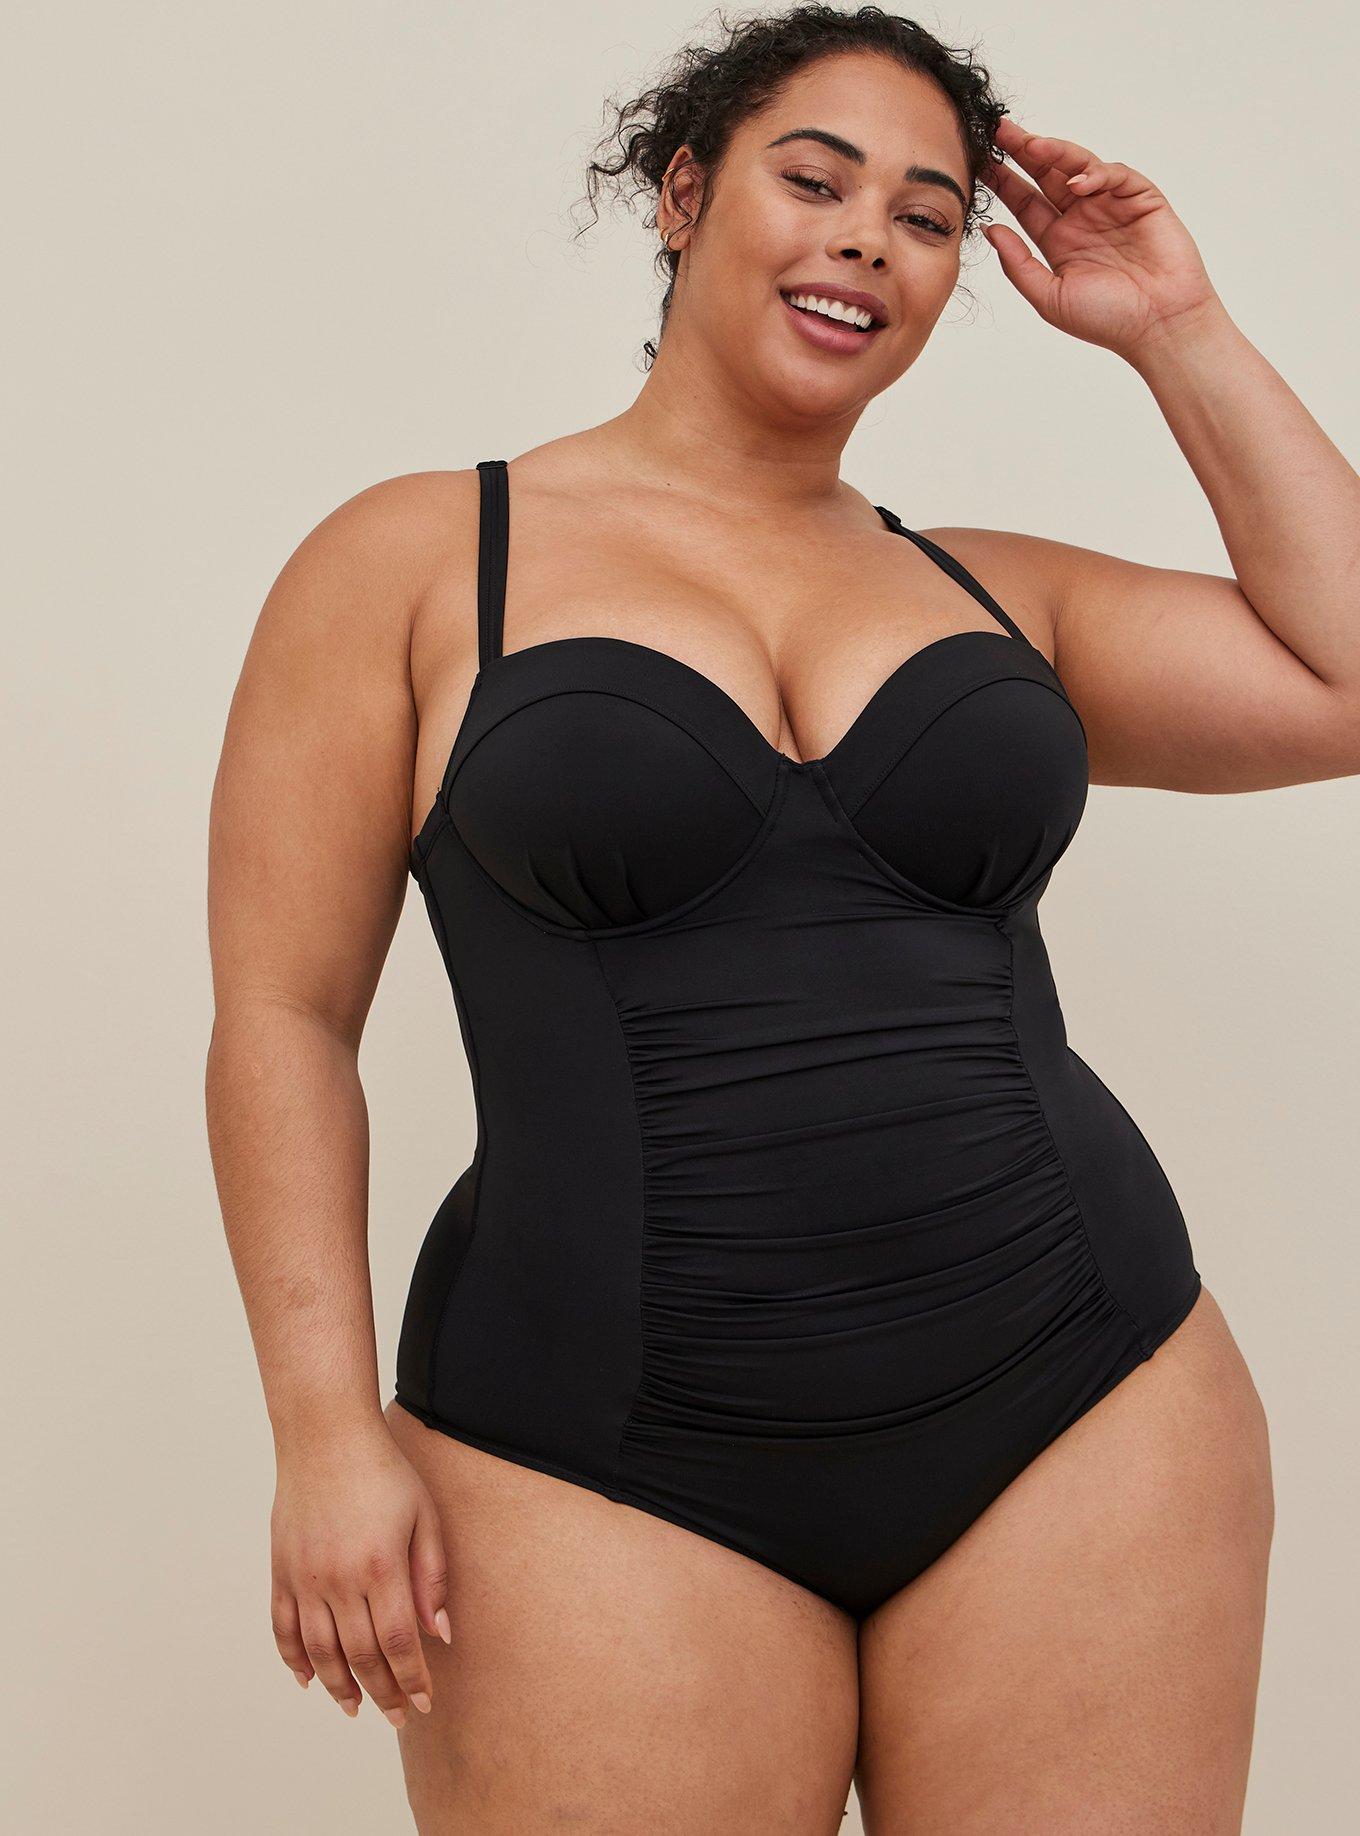 Swimsuits for All Women’s Plus Size Cup Sized Zip Front One Piece Swimsuit,  12 D/DD - Black